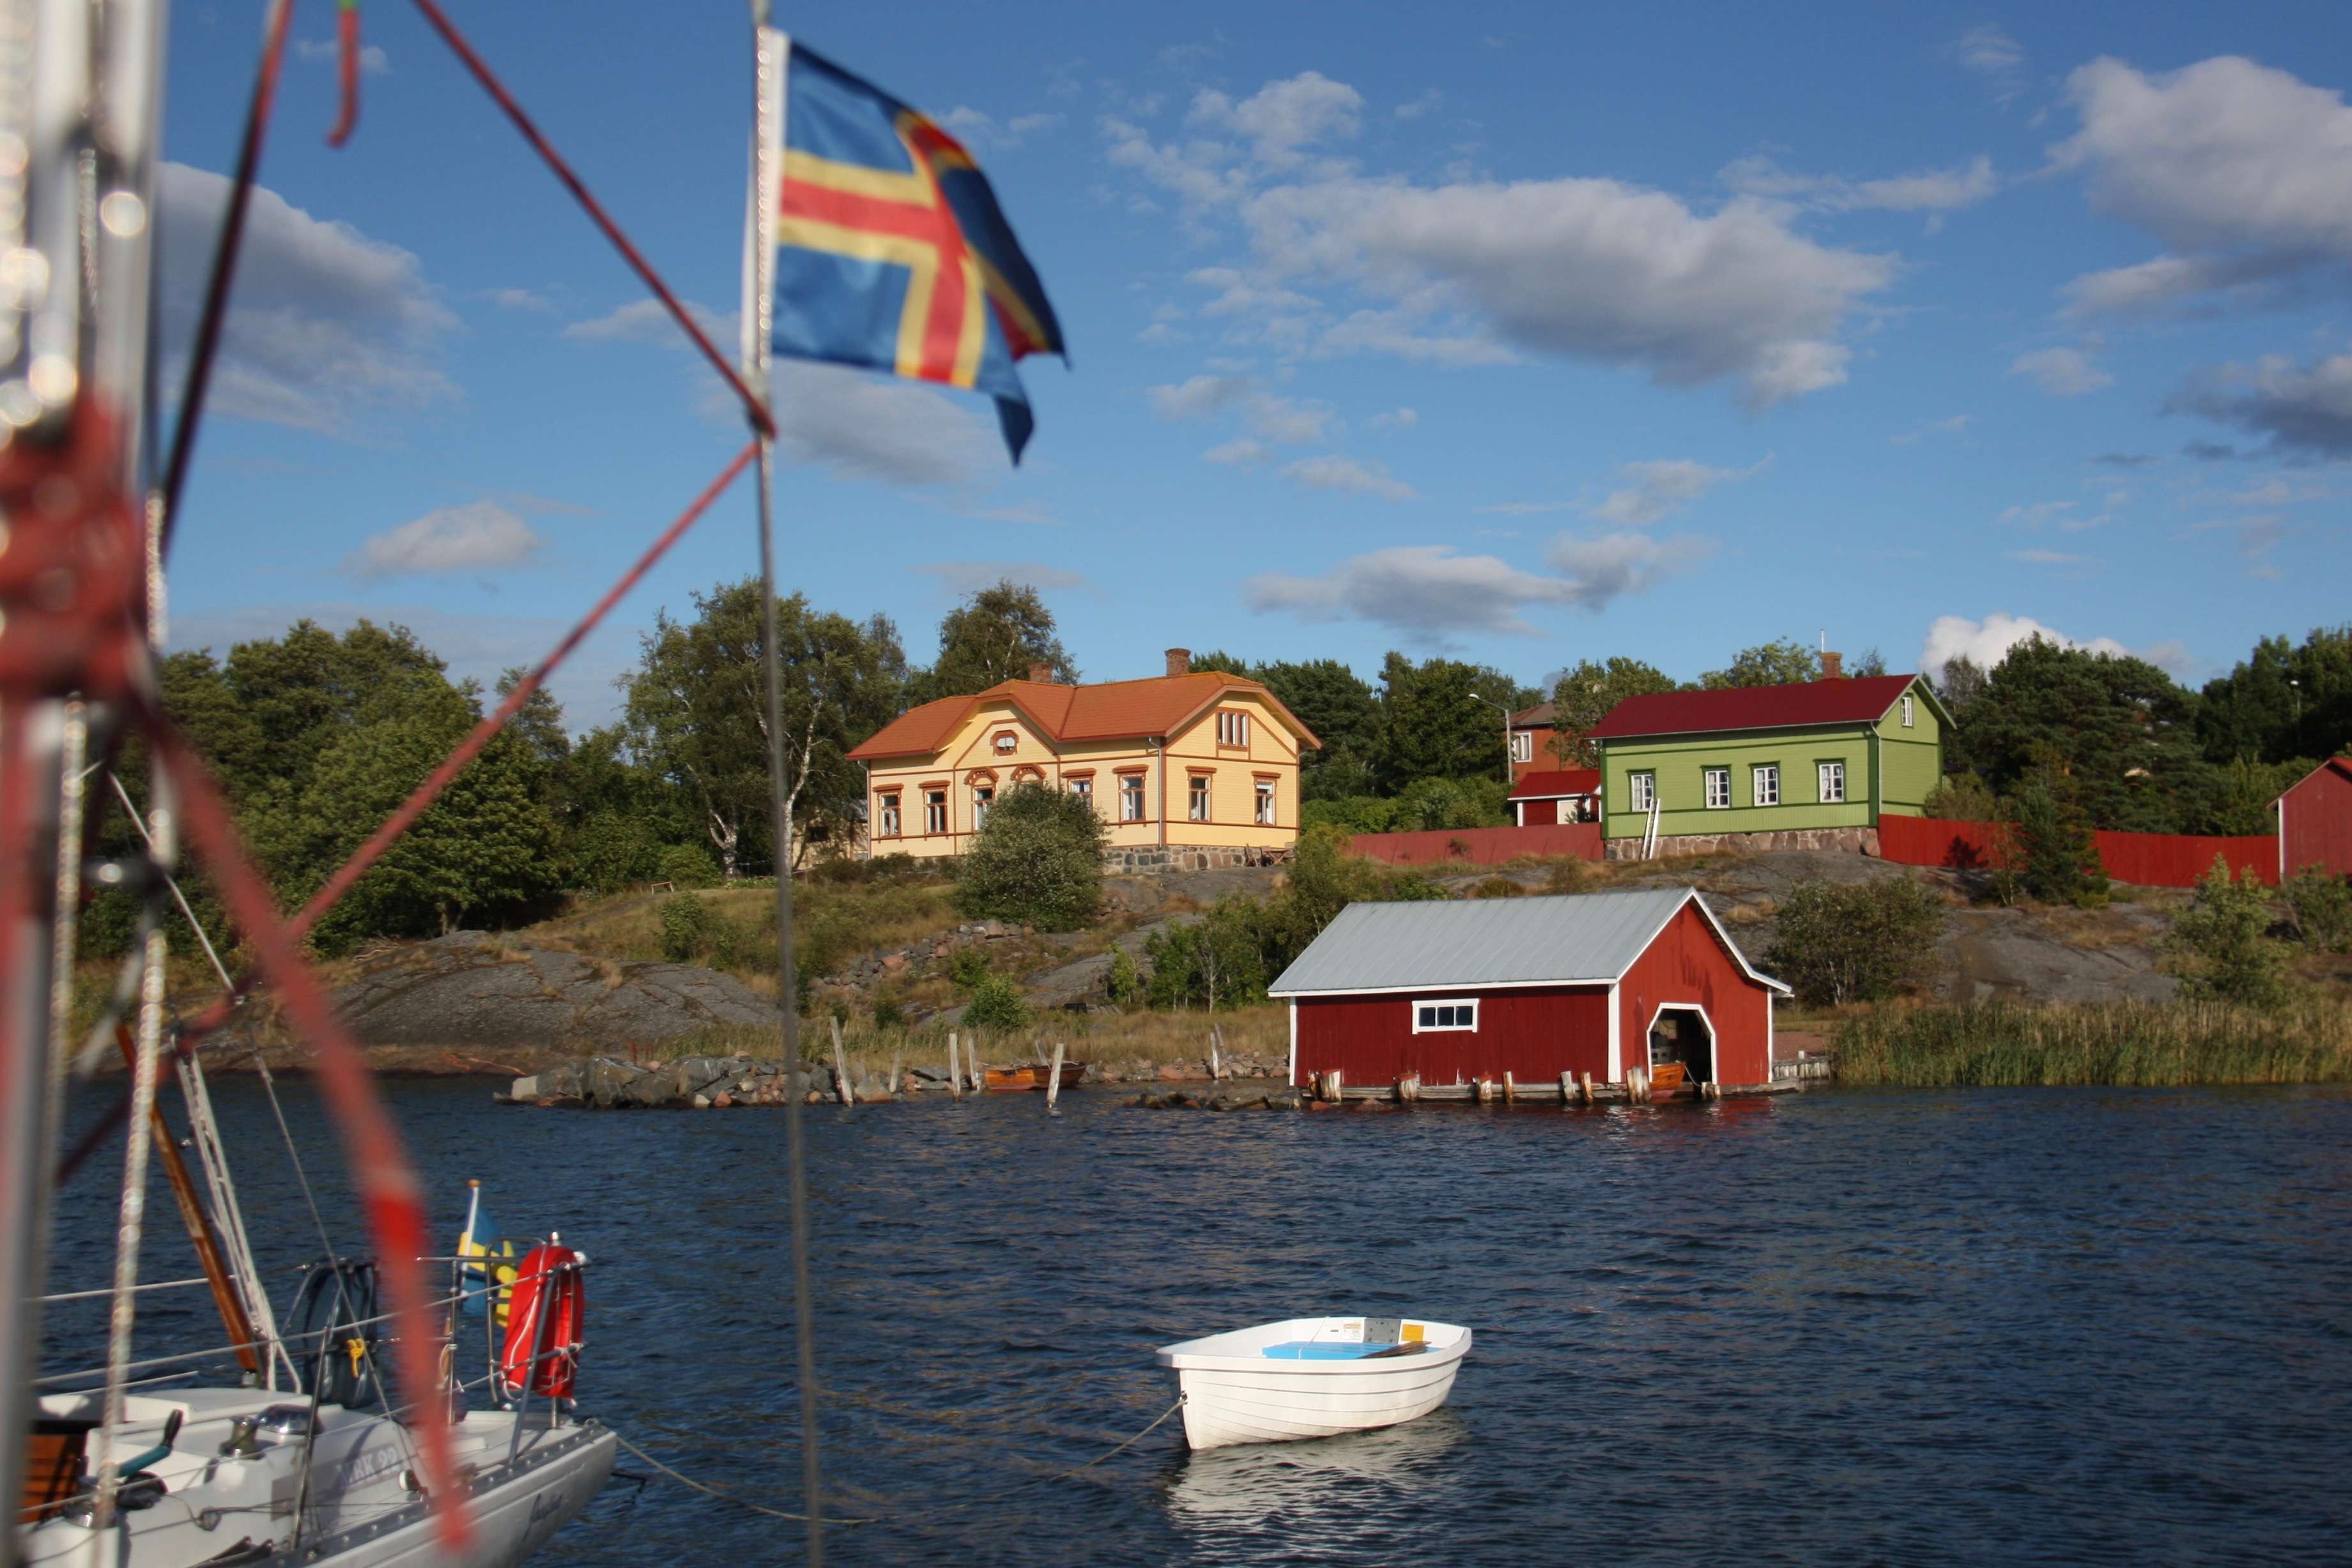 Cruising the Åland Islands between Sweden and Finland is an opportunity to get back to nature, and off the internet grid, with a few rums thrown in